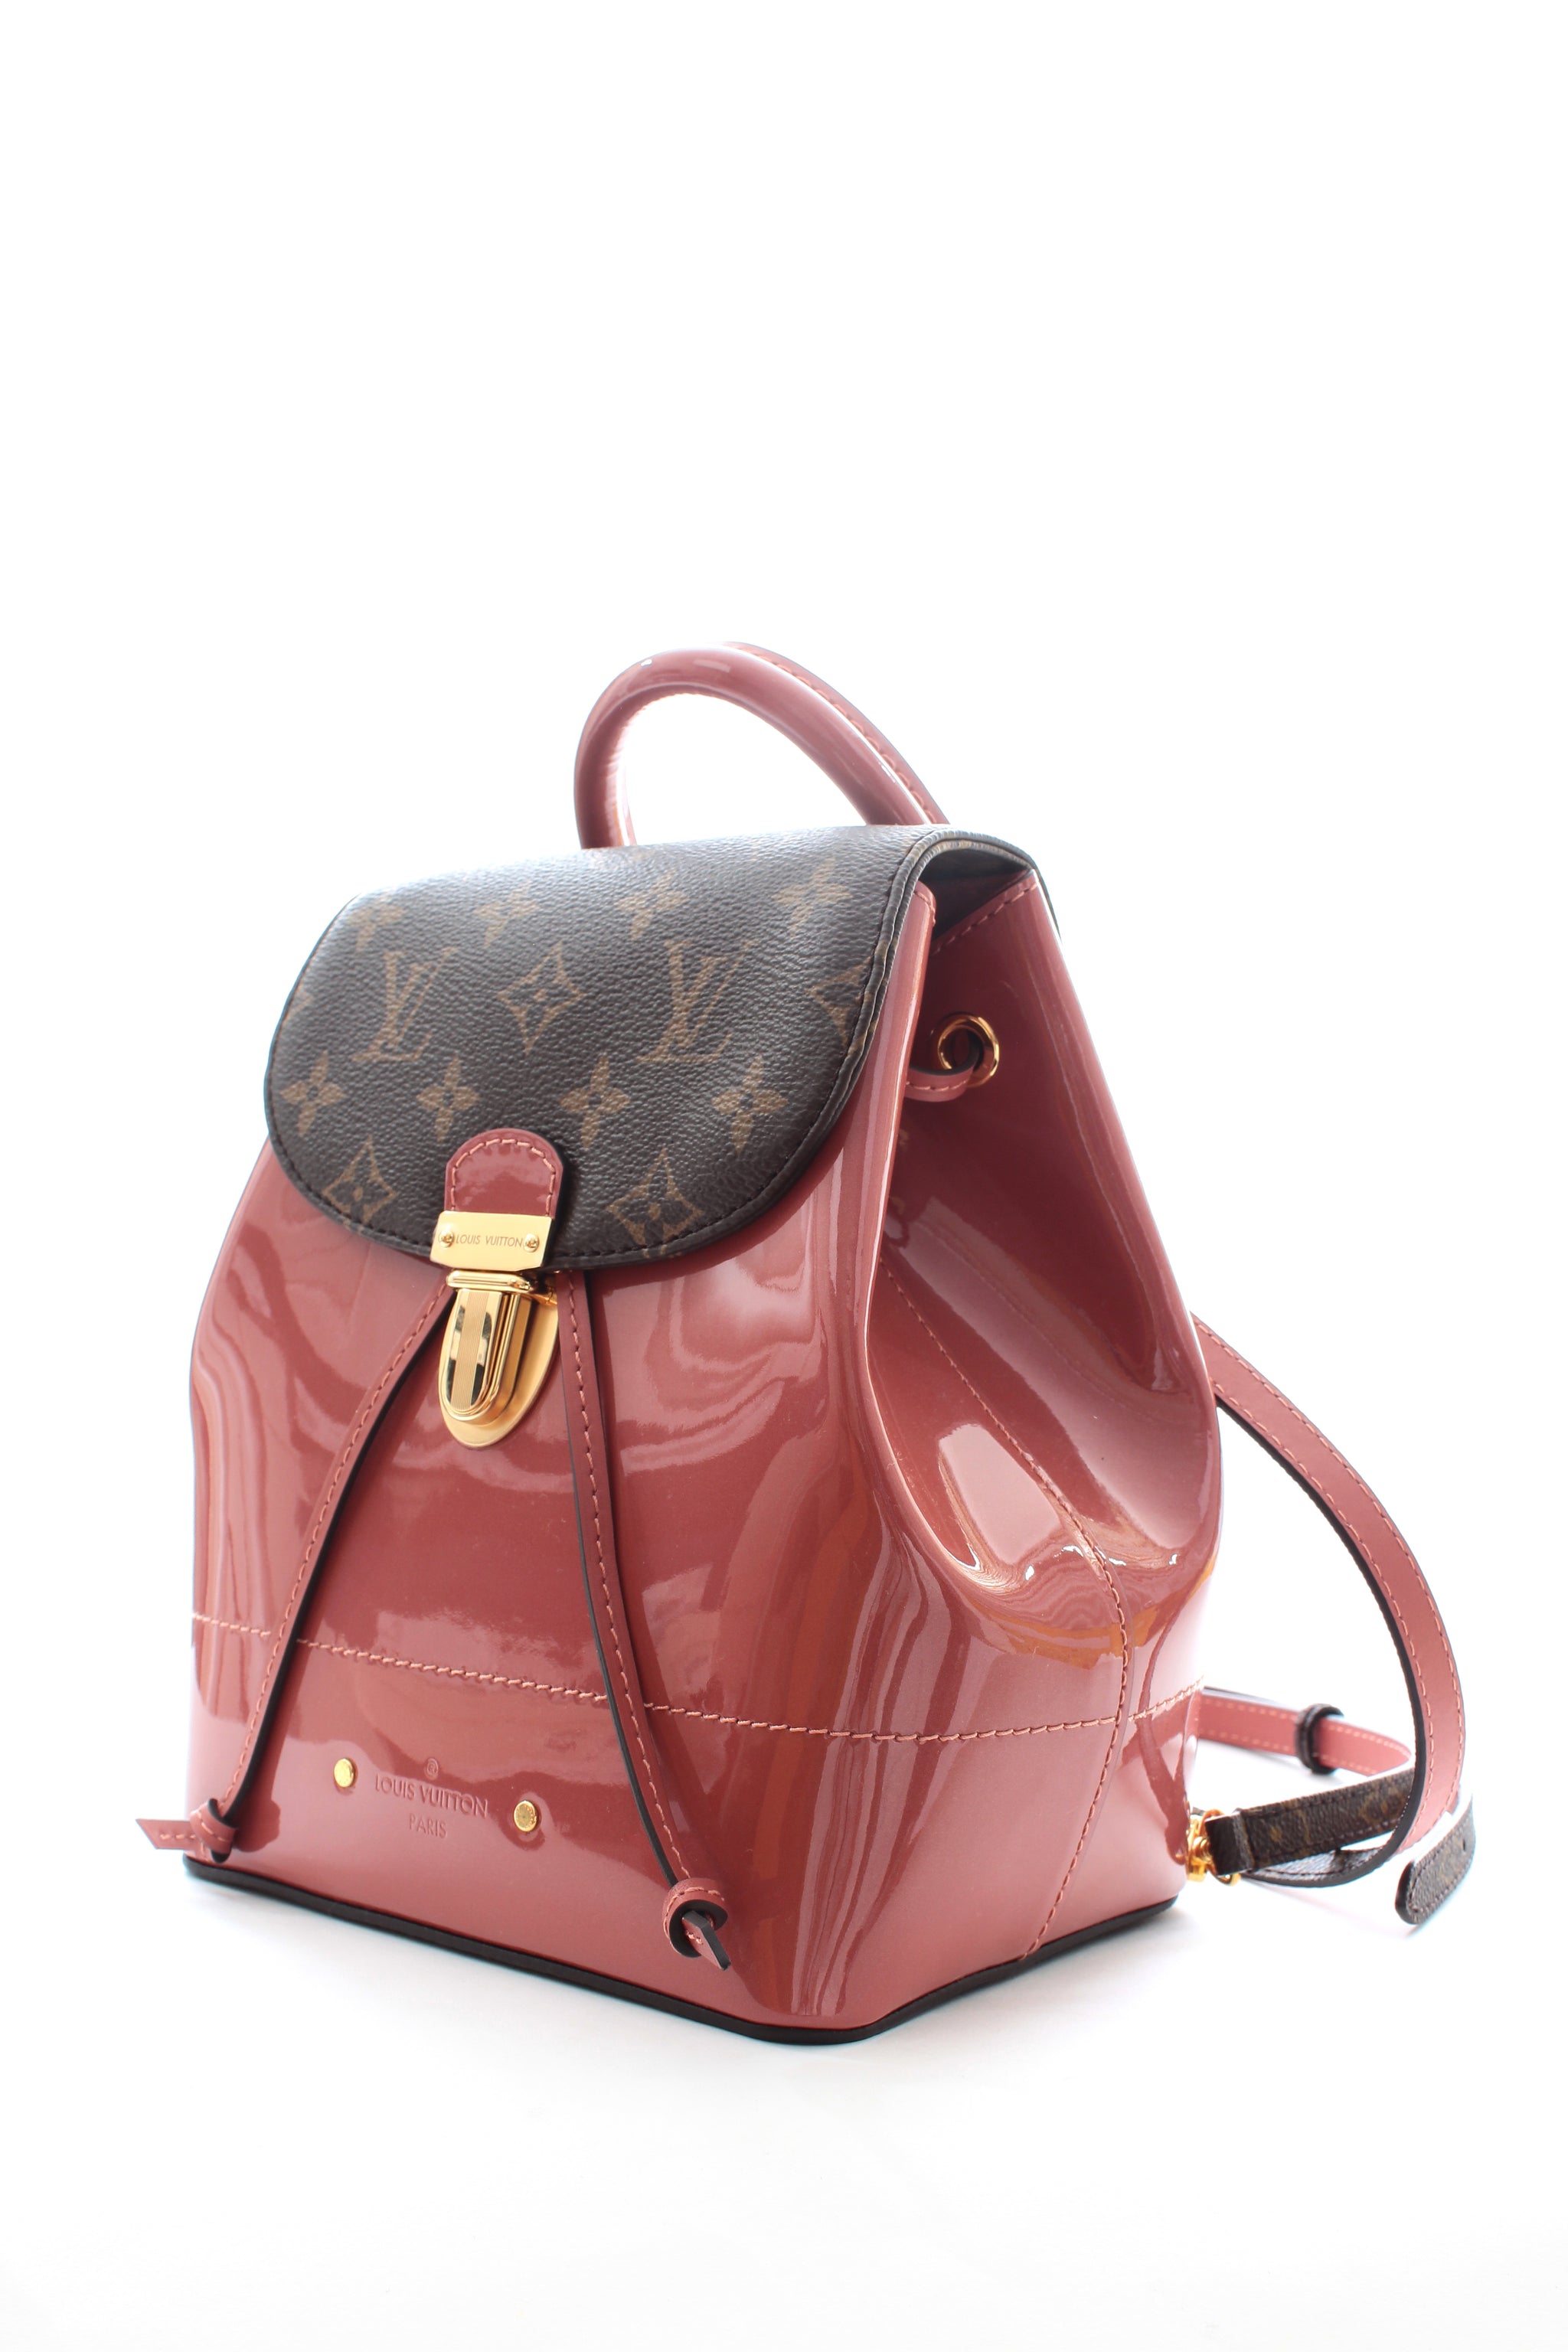 LOUIS VUITTON Hot Springs Backpack White Monogram and Patent